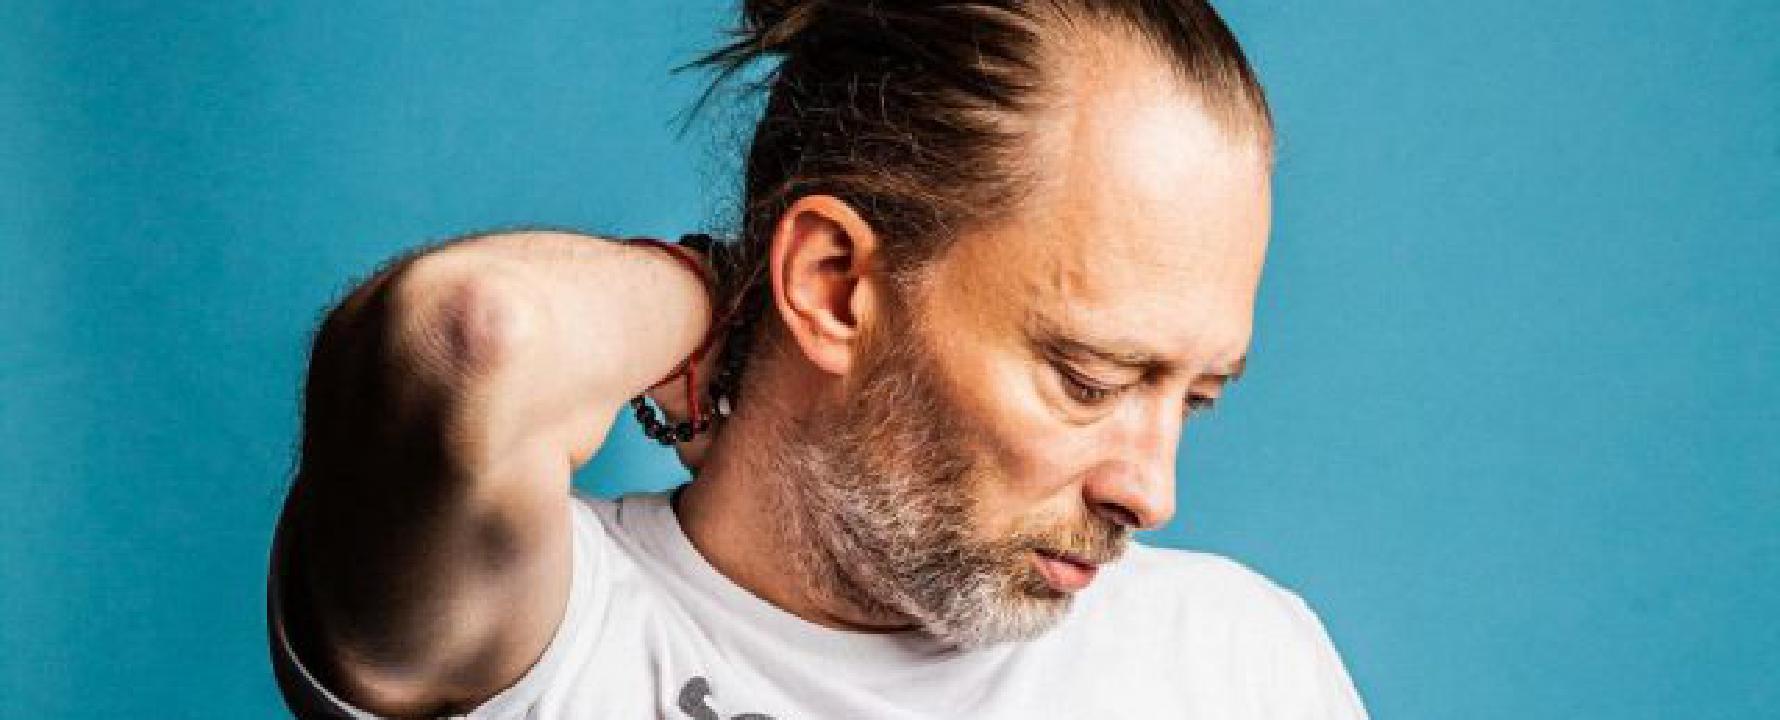 Promotional photograph of Thom Yorke.